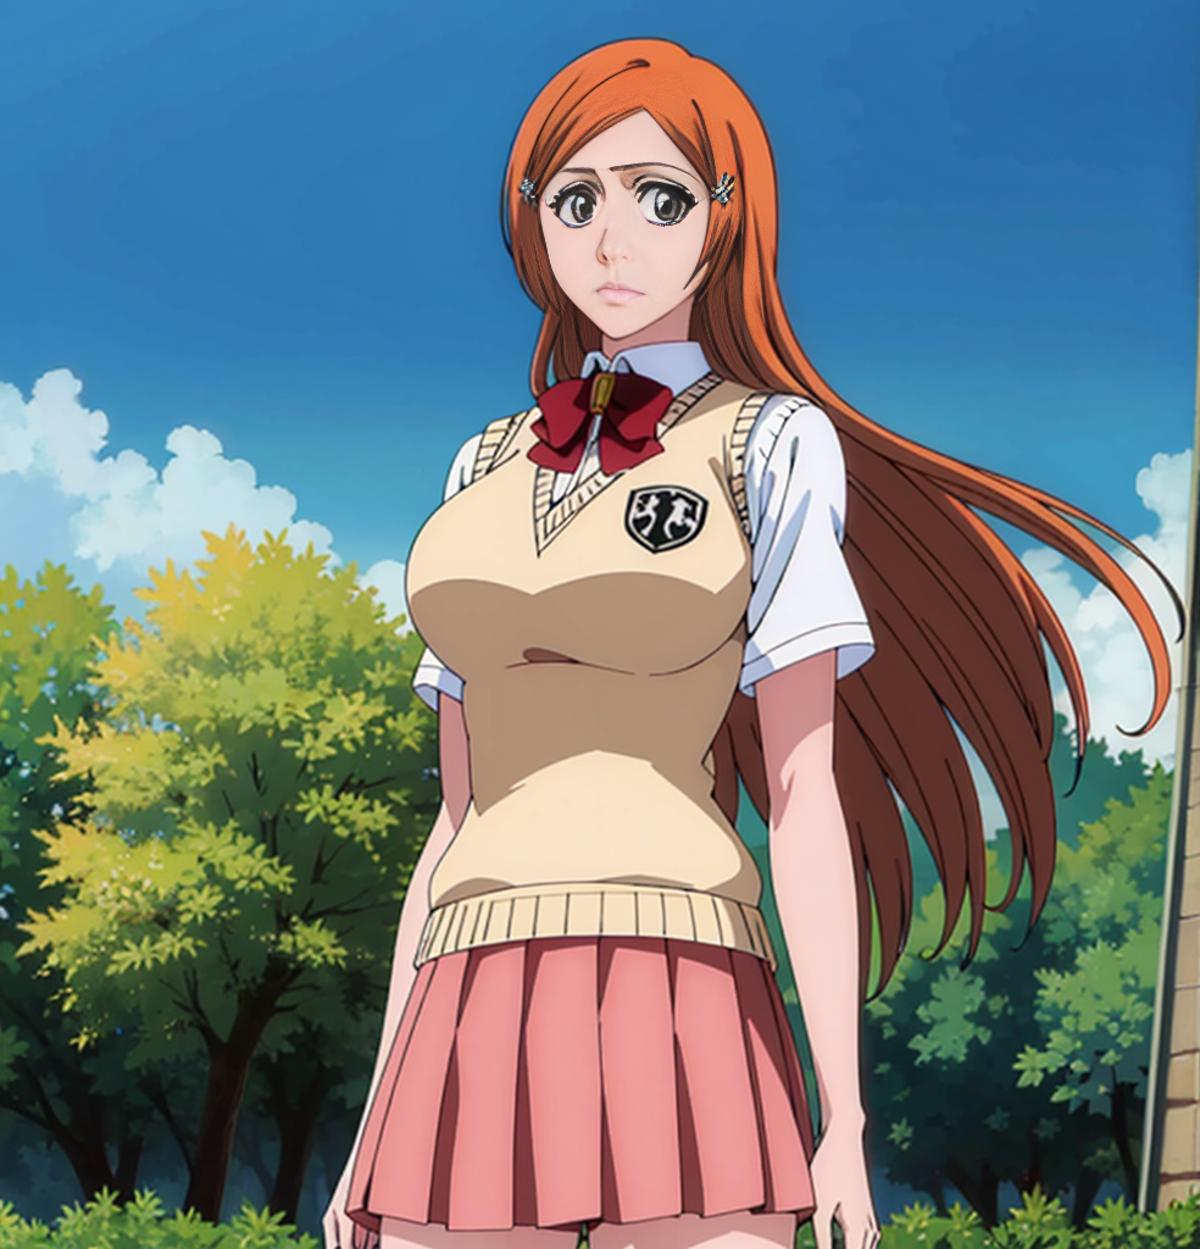 Inoue Orihime (from Bleach) image by e0972951006